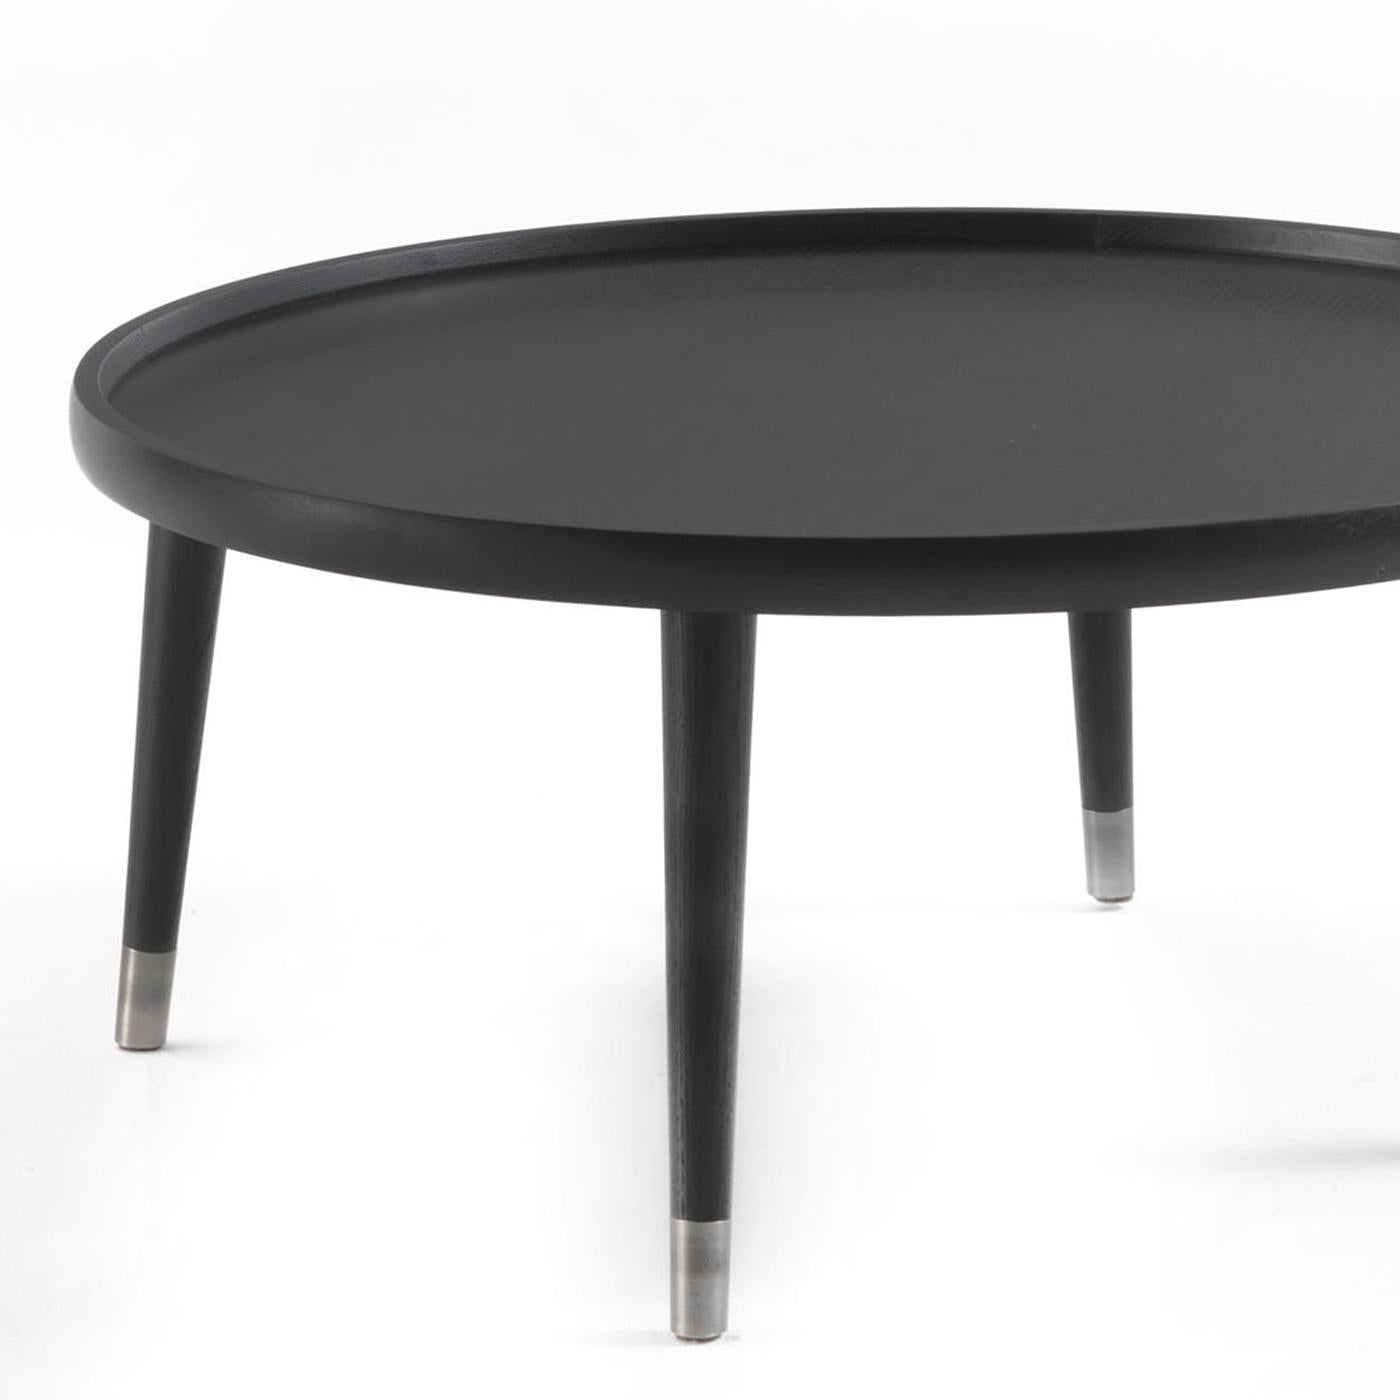 Coffee table domio wood with solid ash structure 
and roud top in black finish. With metal parts on feet.